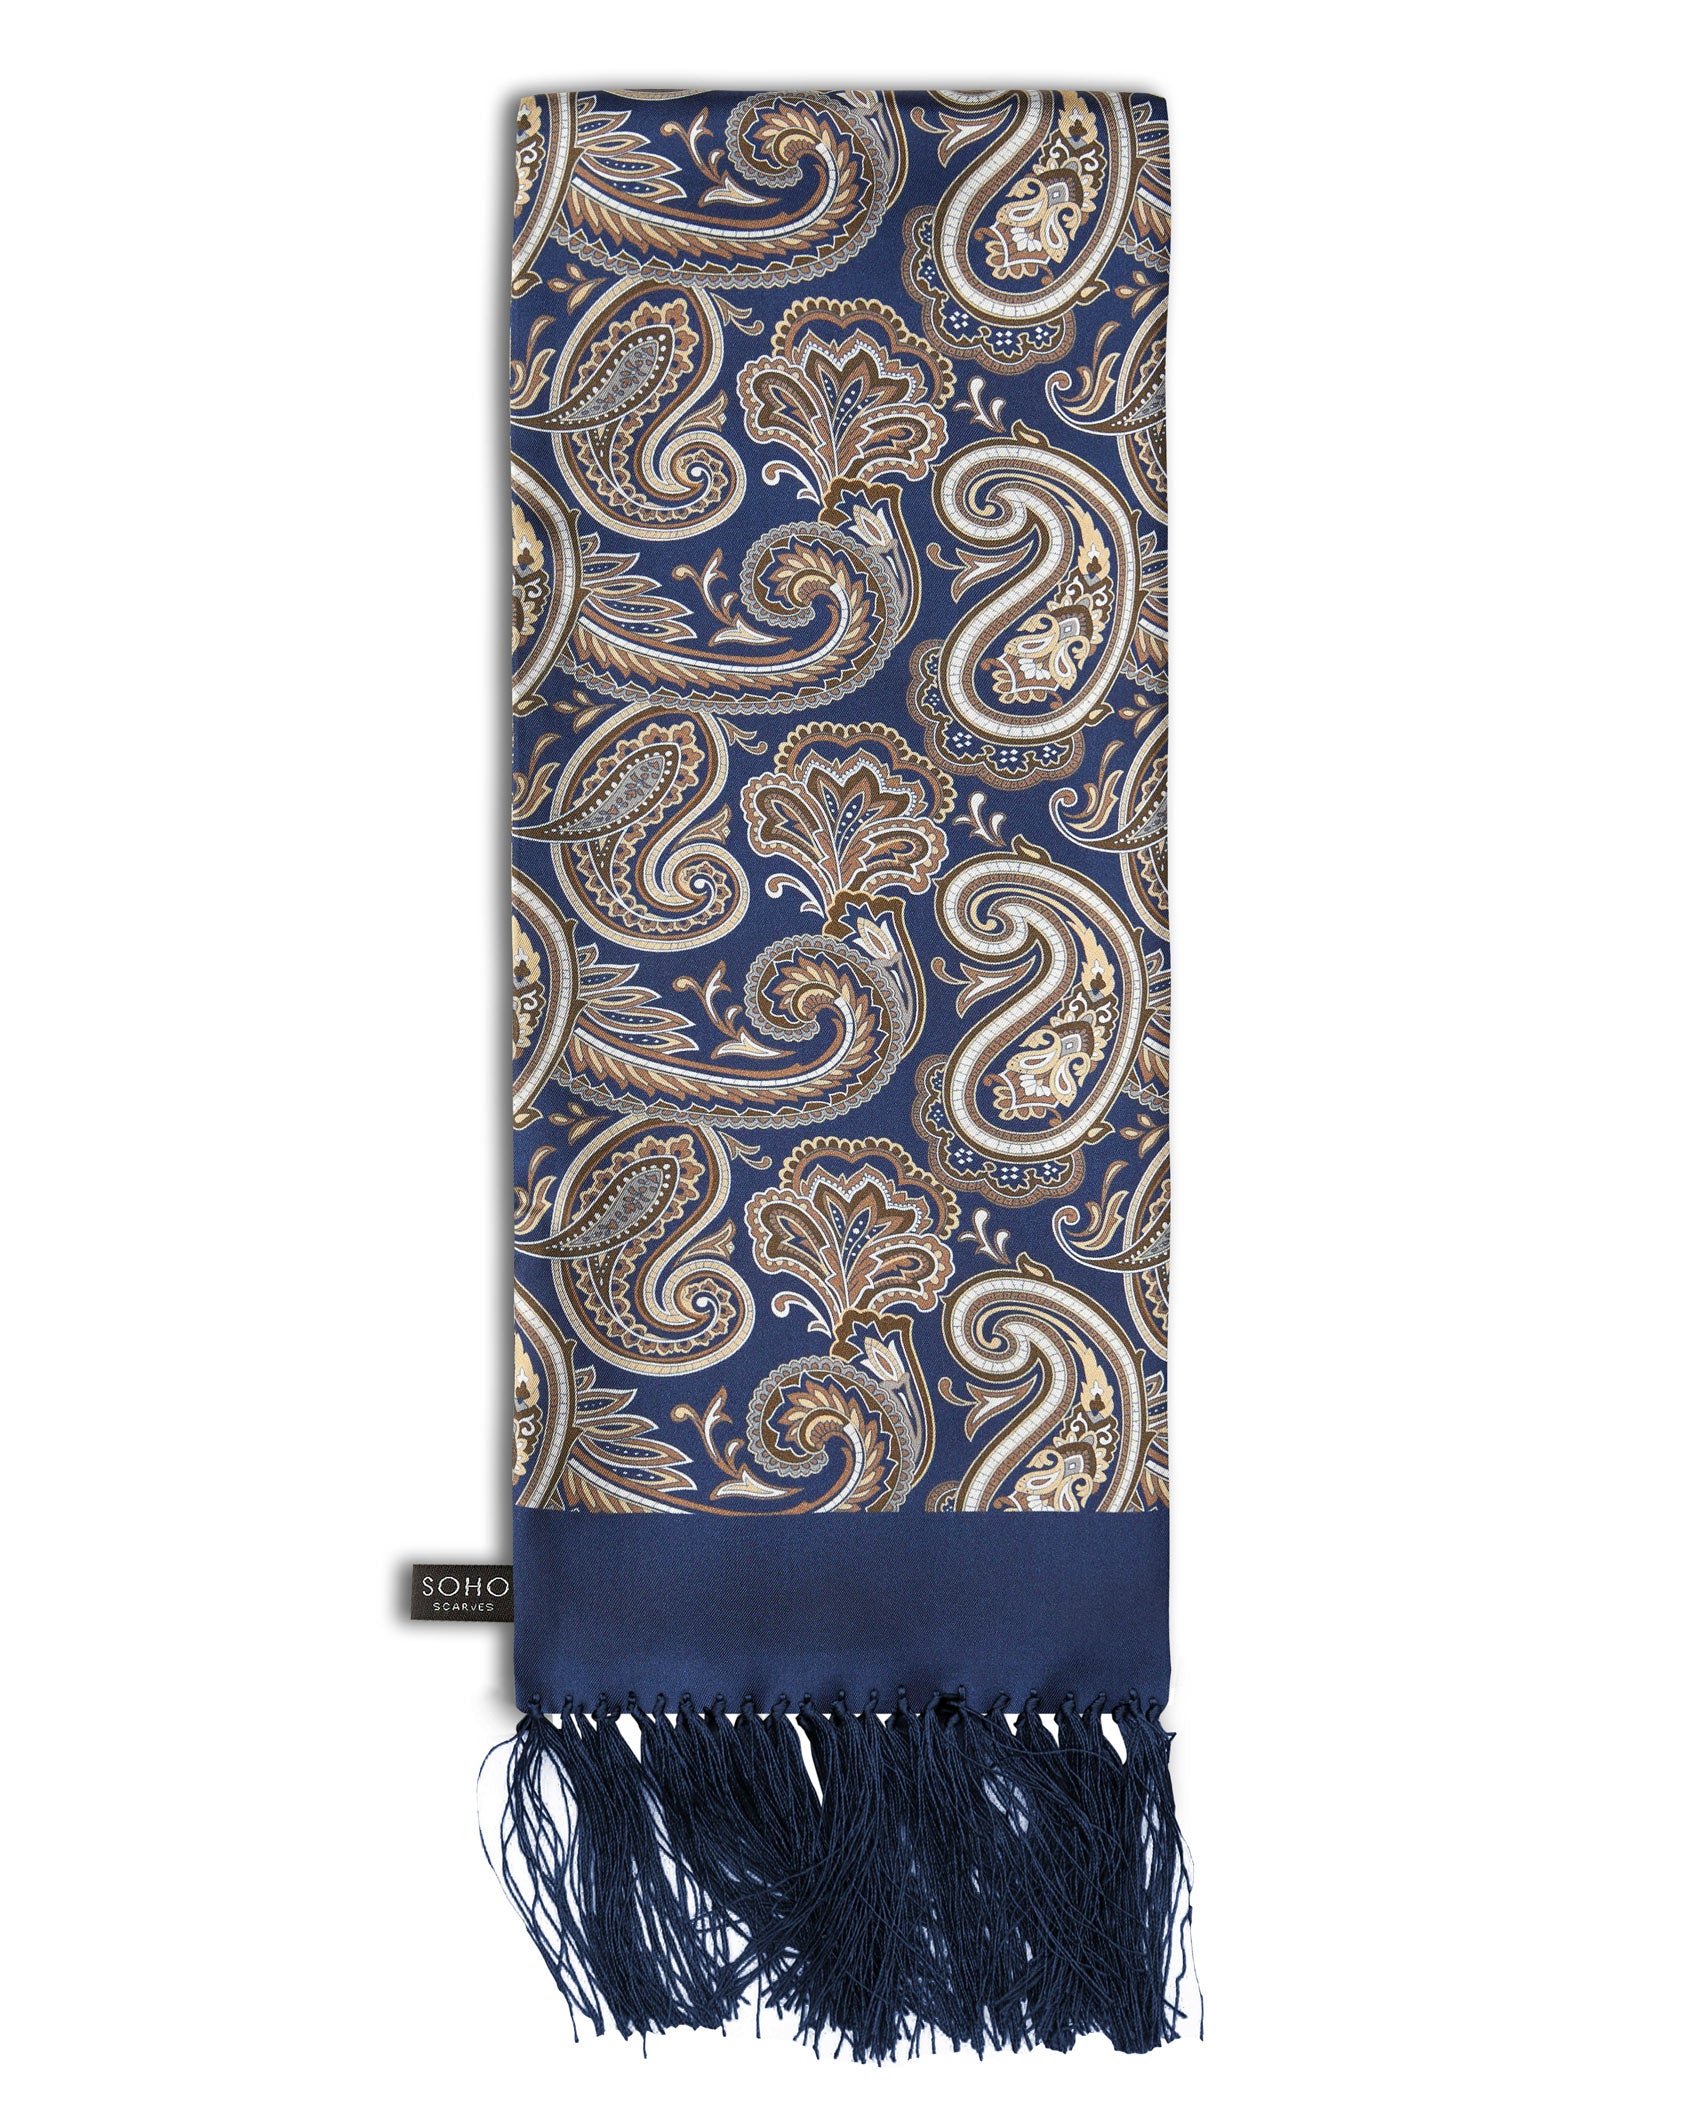 'The Redmond Aviator' deep blue silk scarf with large gold and cream paisley patterns, arranged in a rectangular shape, clearly showing the dark-blue 3-inch fringe and the 'Soho Scarves' label on the left edge.